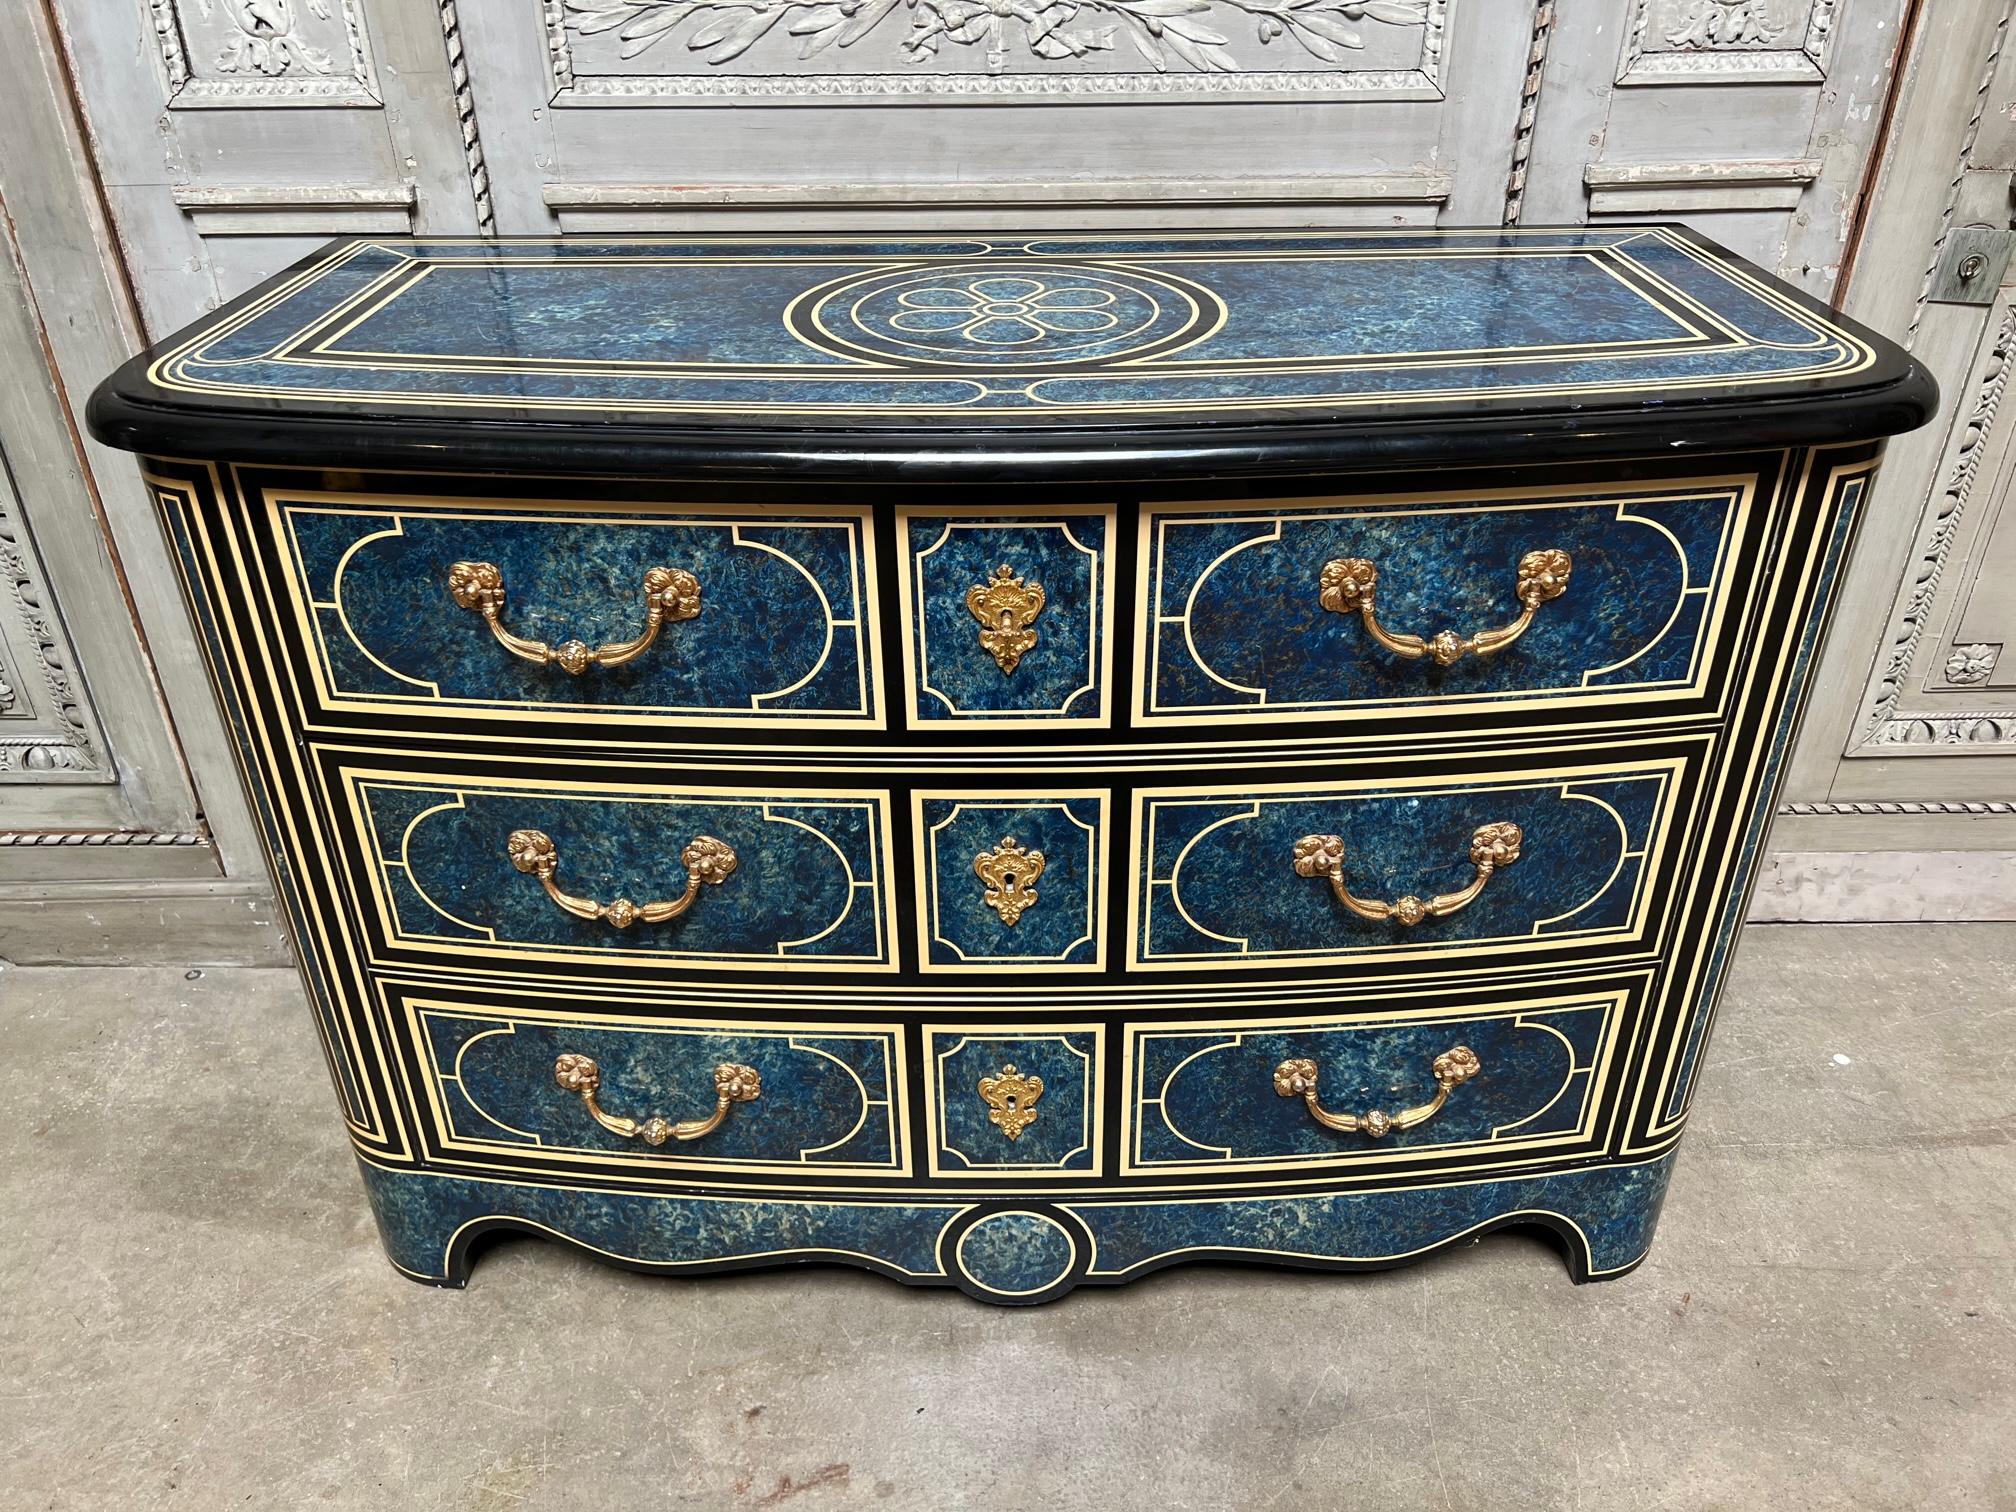 A French Regence style Commode with a black blue and white lacquered finish with a parquetry design. This fabulous commode - chest of drawers is highly decorative and belonged to the well known Parisian entertainer, Michou.